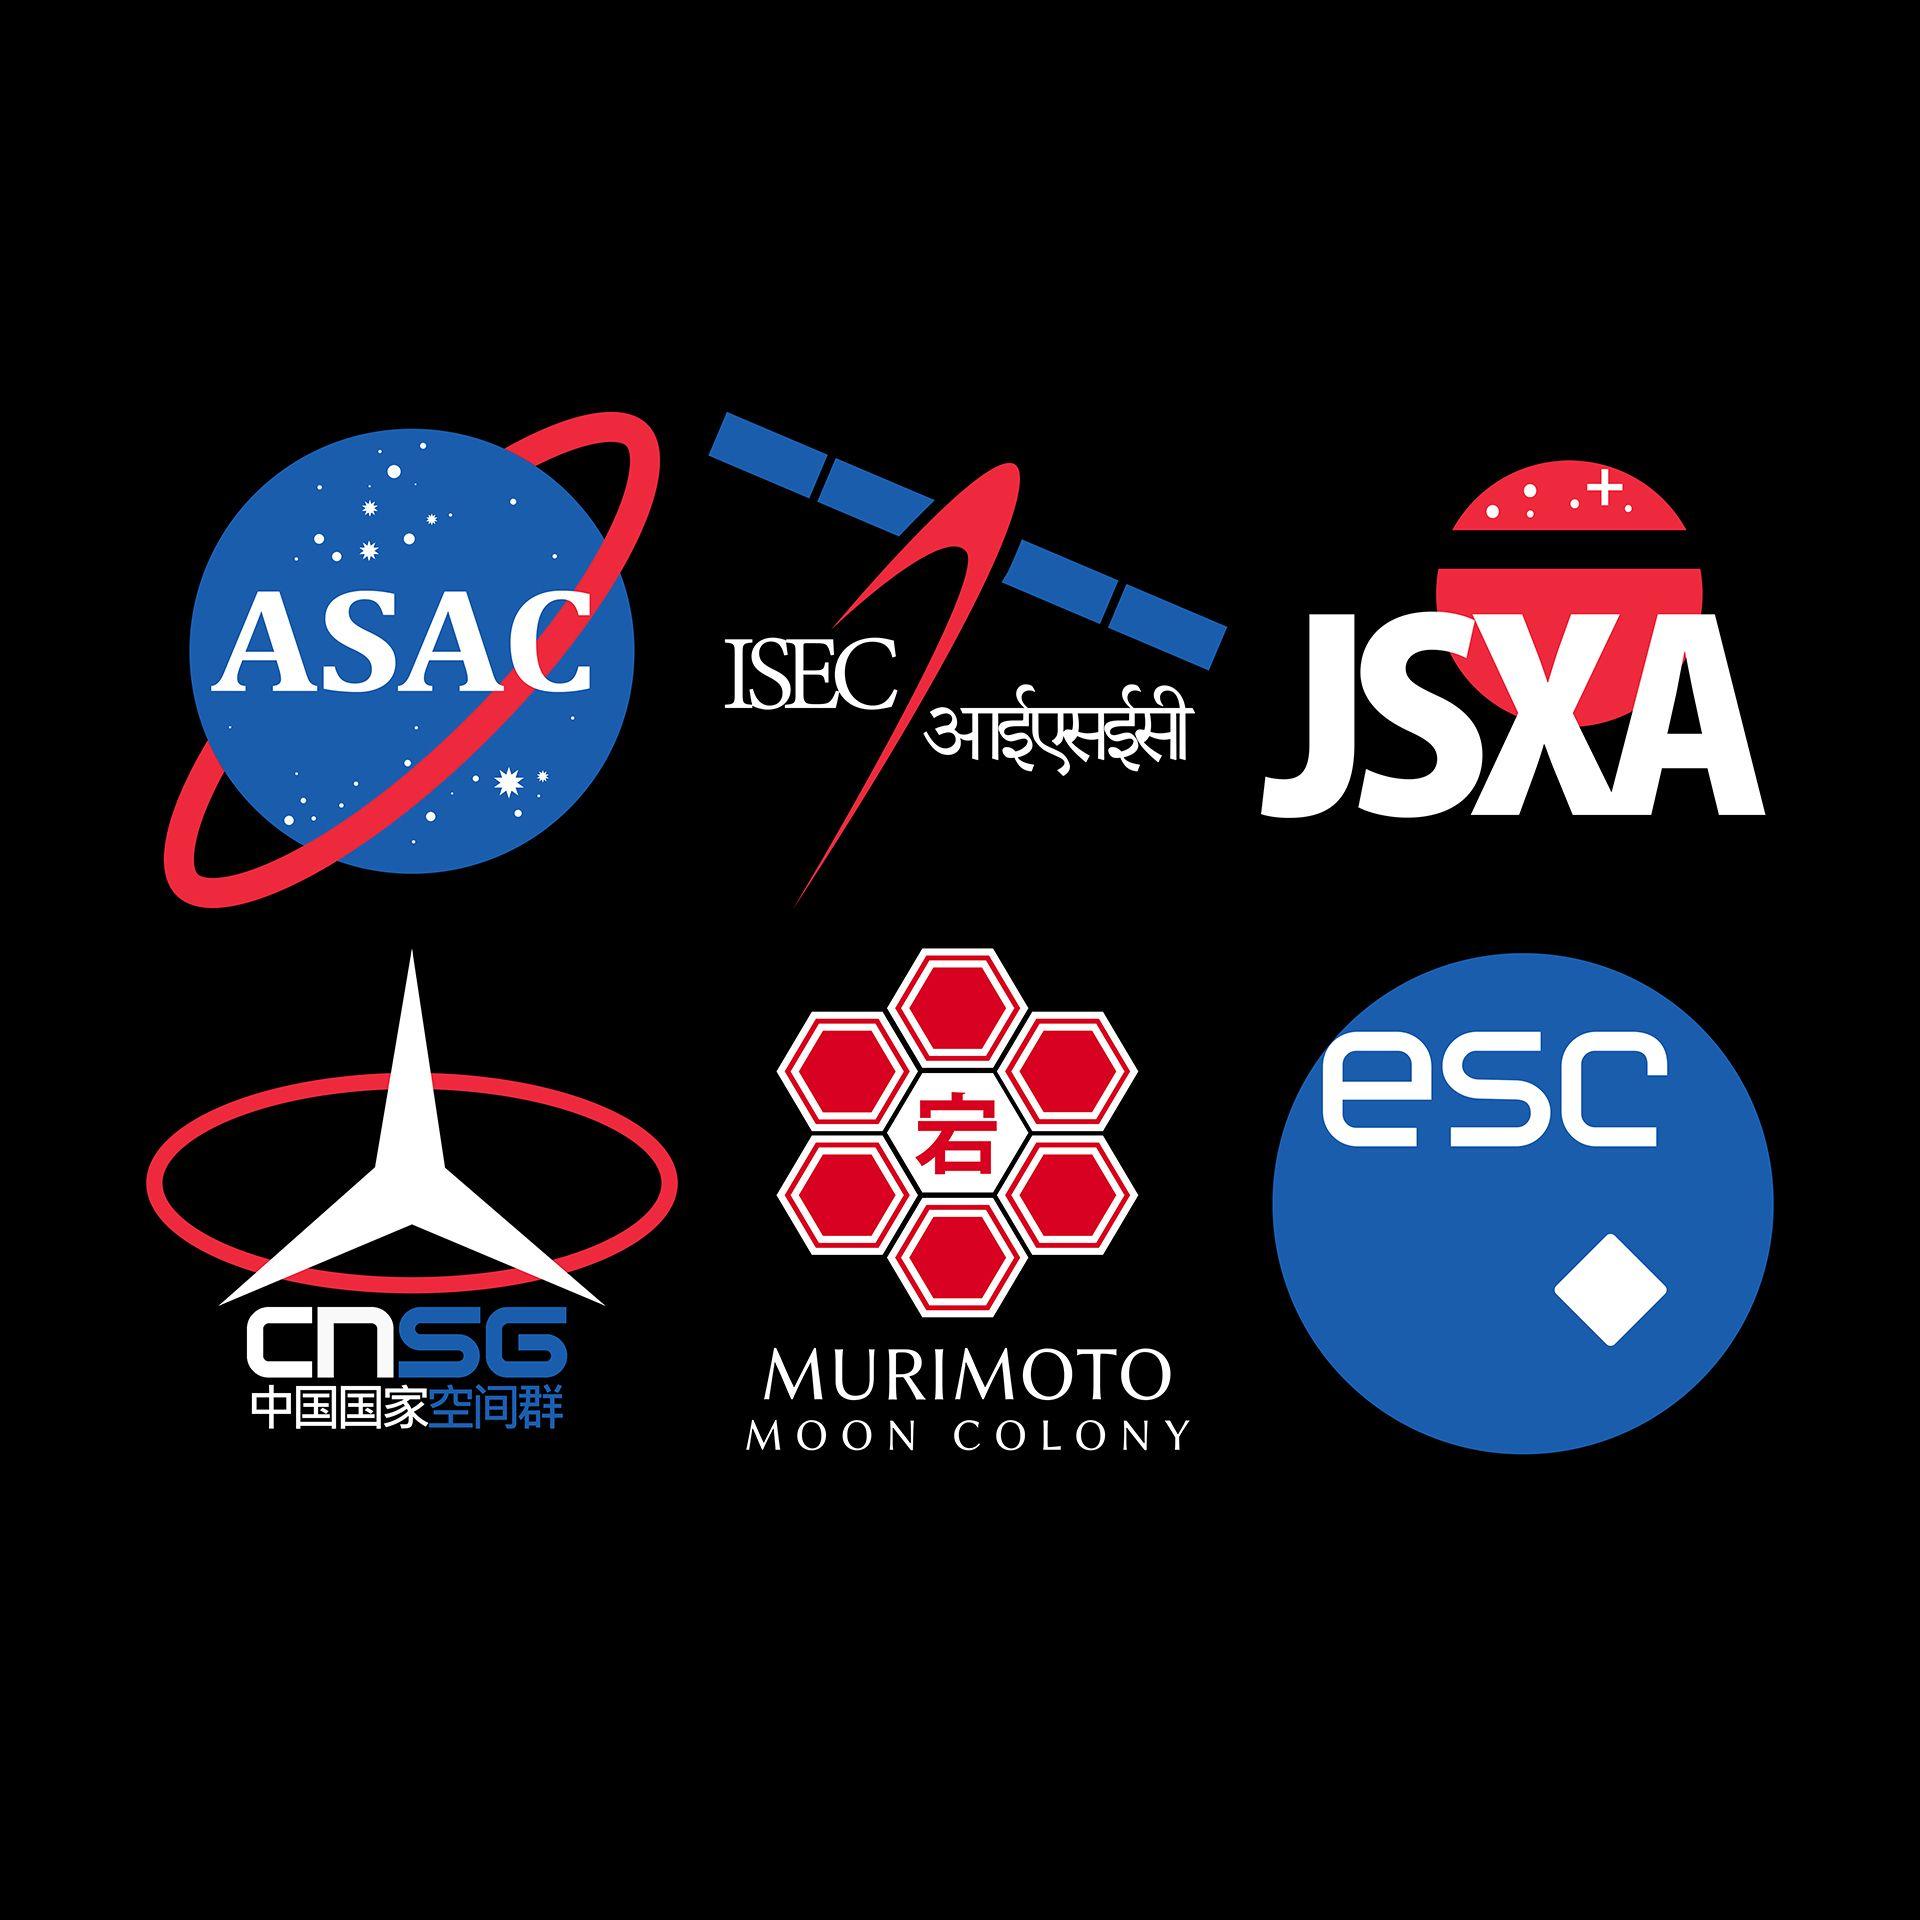 Space Agency Logo - Space Agency Logo image of Tranquility